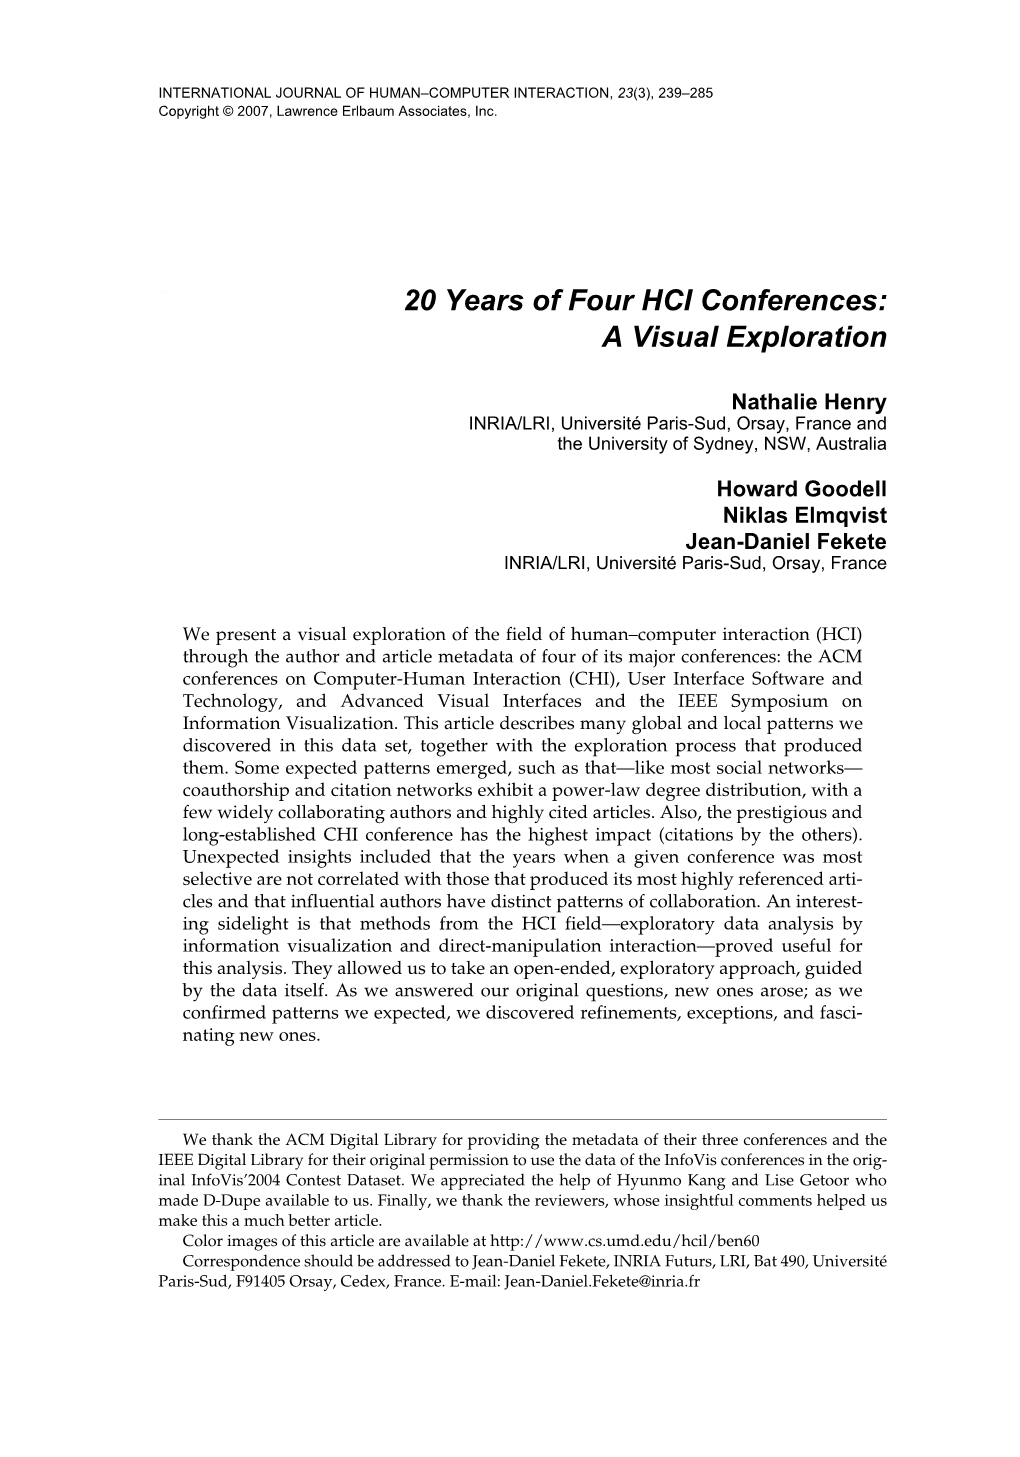 20 Years of Four HCI Conferences: a Visual Exploration